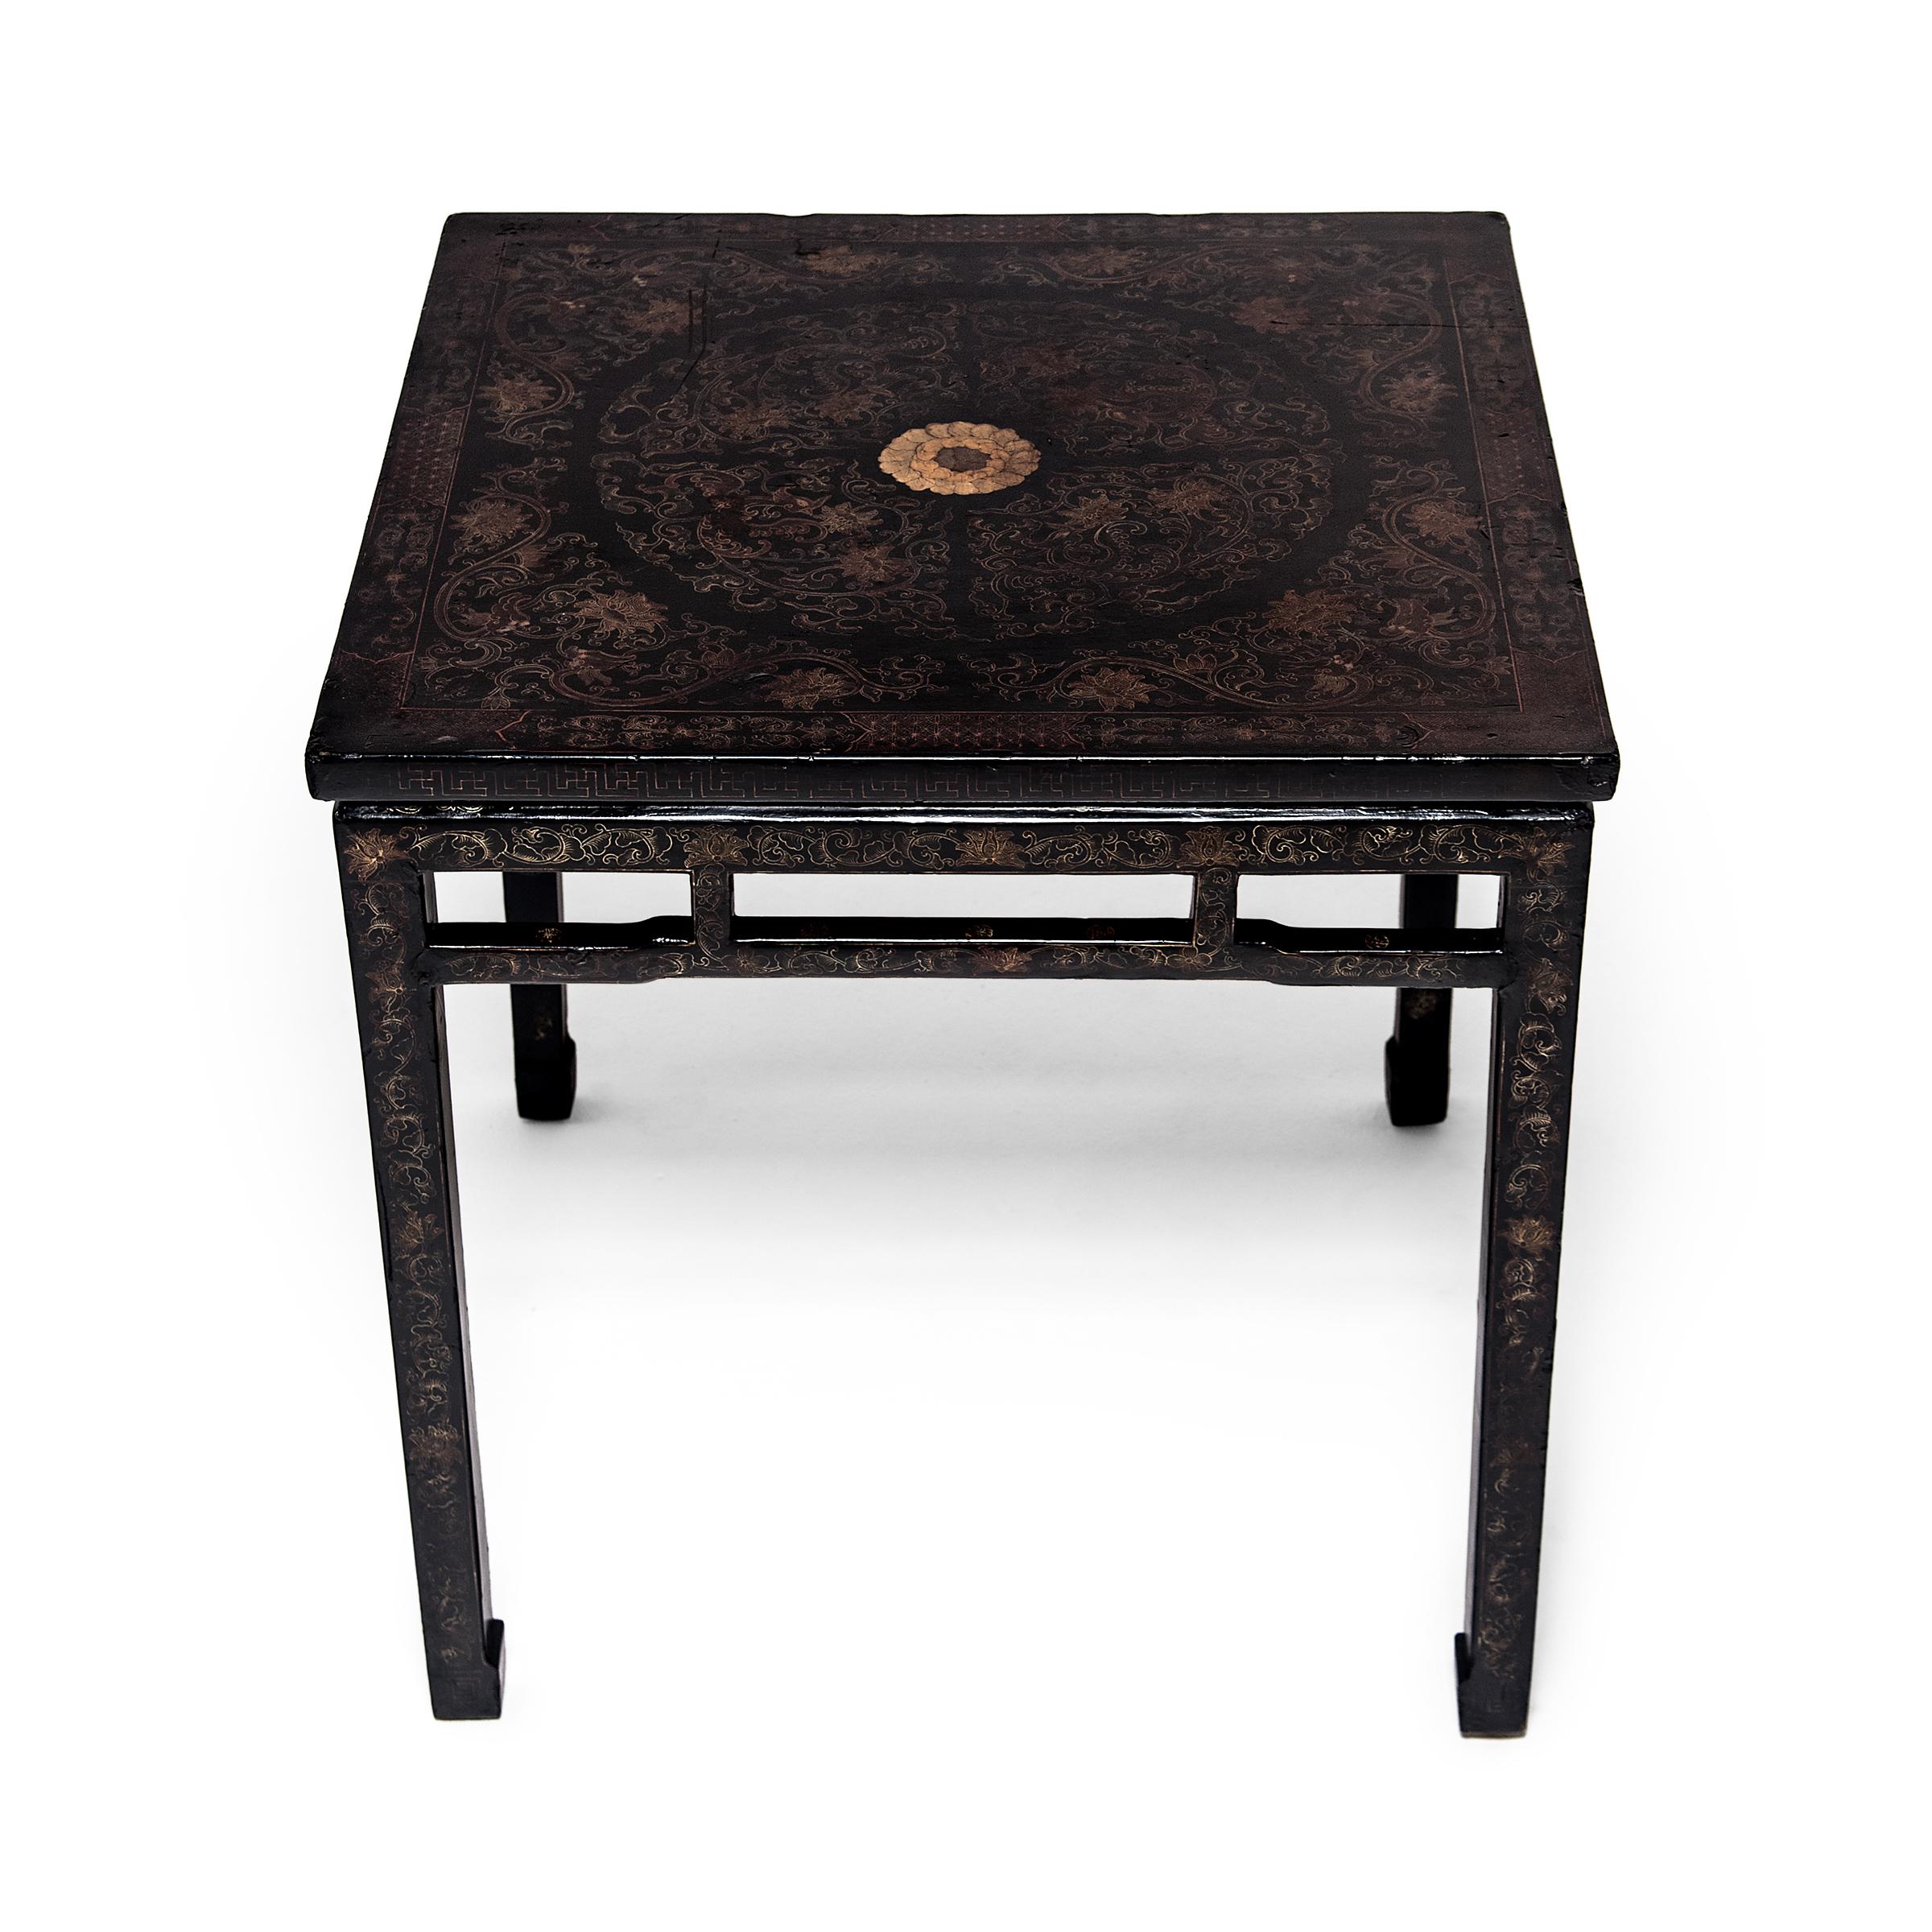 Atop a layer of lustrous black lacquer, intricately painted floral decoration elevates this minimal square table into a work of art. A leafy trailing vines motif winds across the surface, concealing abstract phoenix and dragon forms and framing a